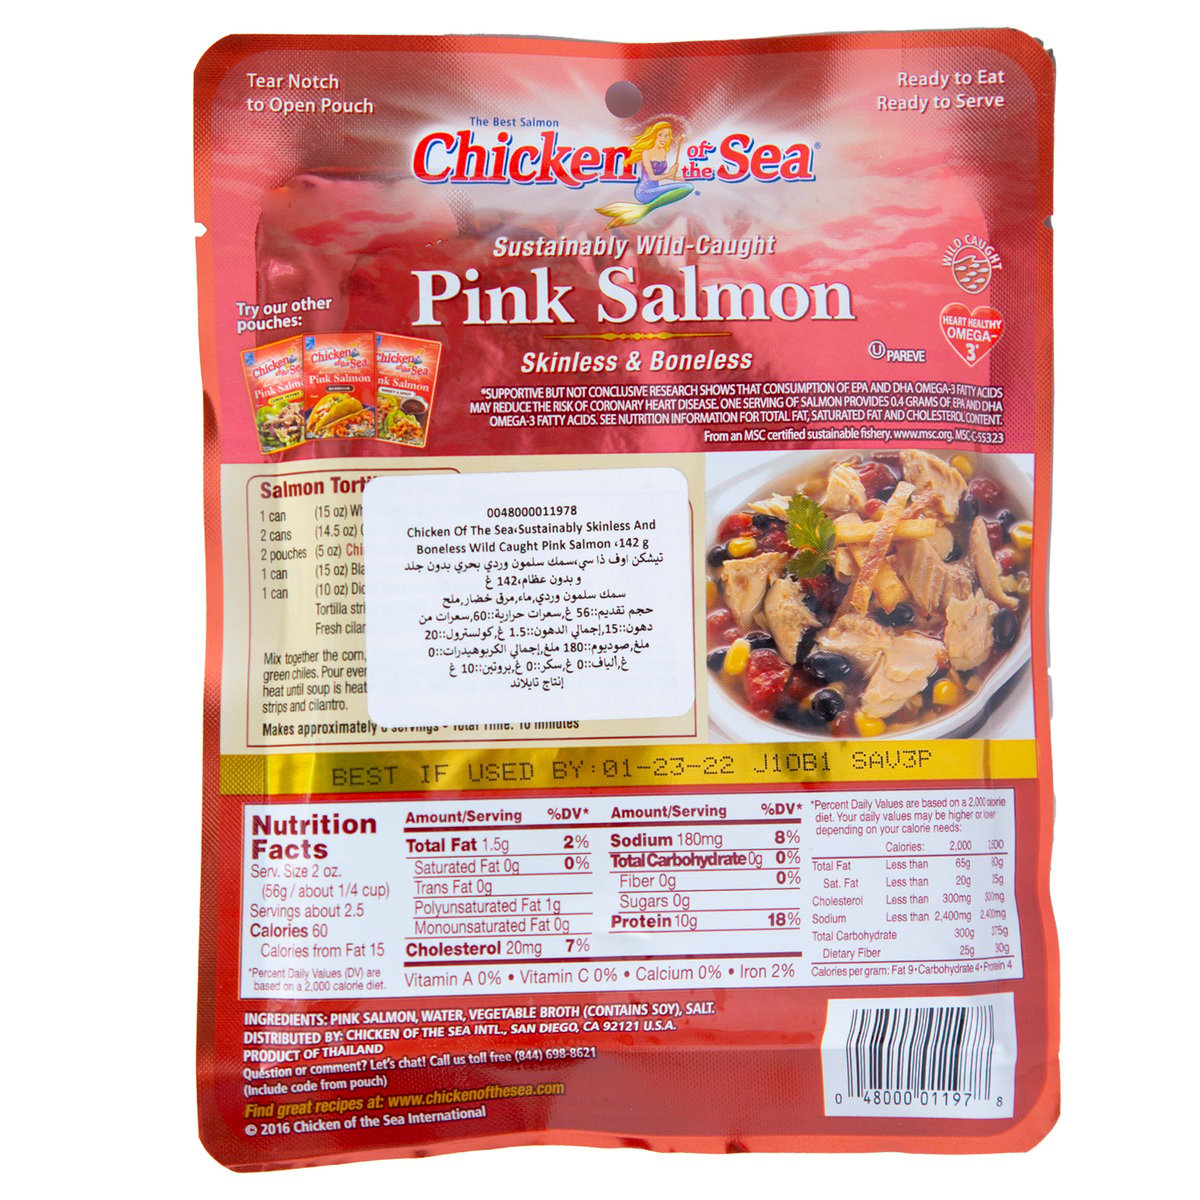 Chicken Of the Sea Sustainably Wild Caught Pink Salmon 142 g